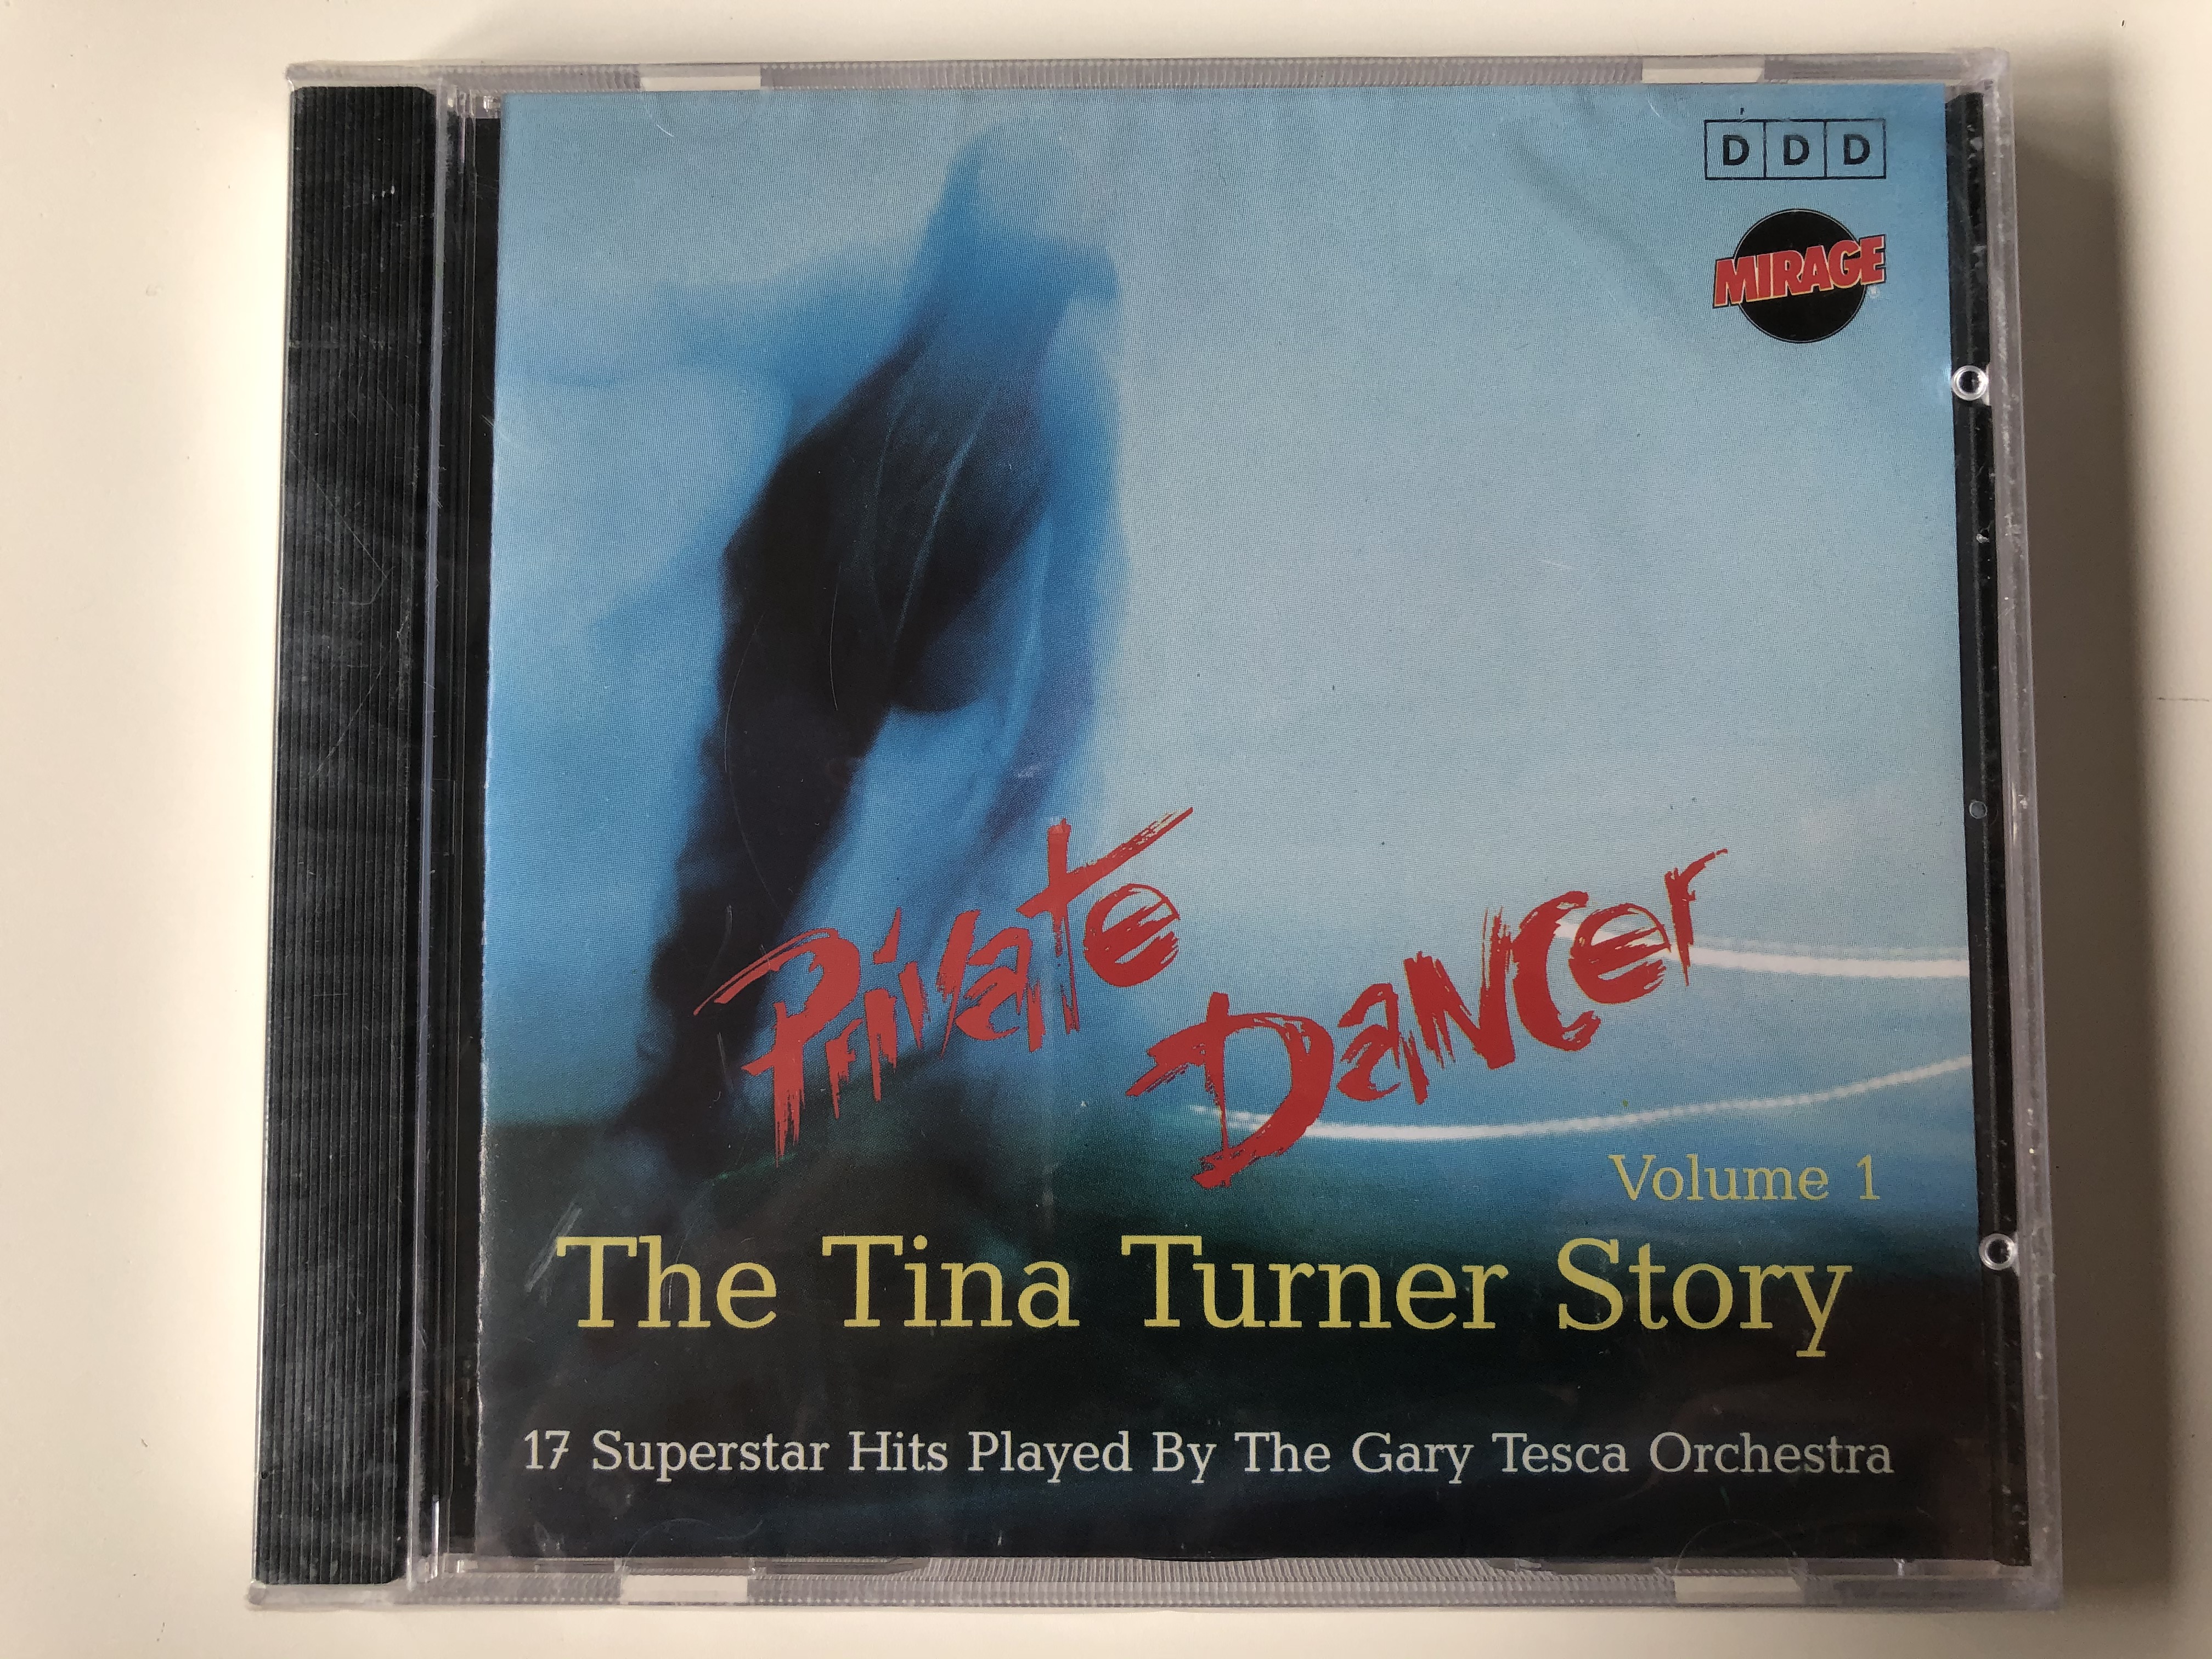 private-dancer-volume-1-the-tina-turner-story-17-superstar-hits-played-by-the-gary-tesca-orchestra-mirage-audio-cd-8712629025105-1-.jpg